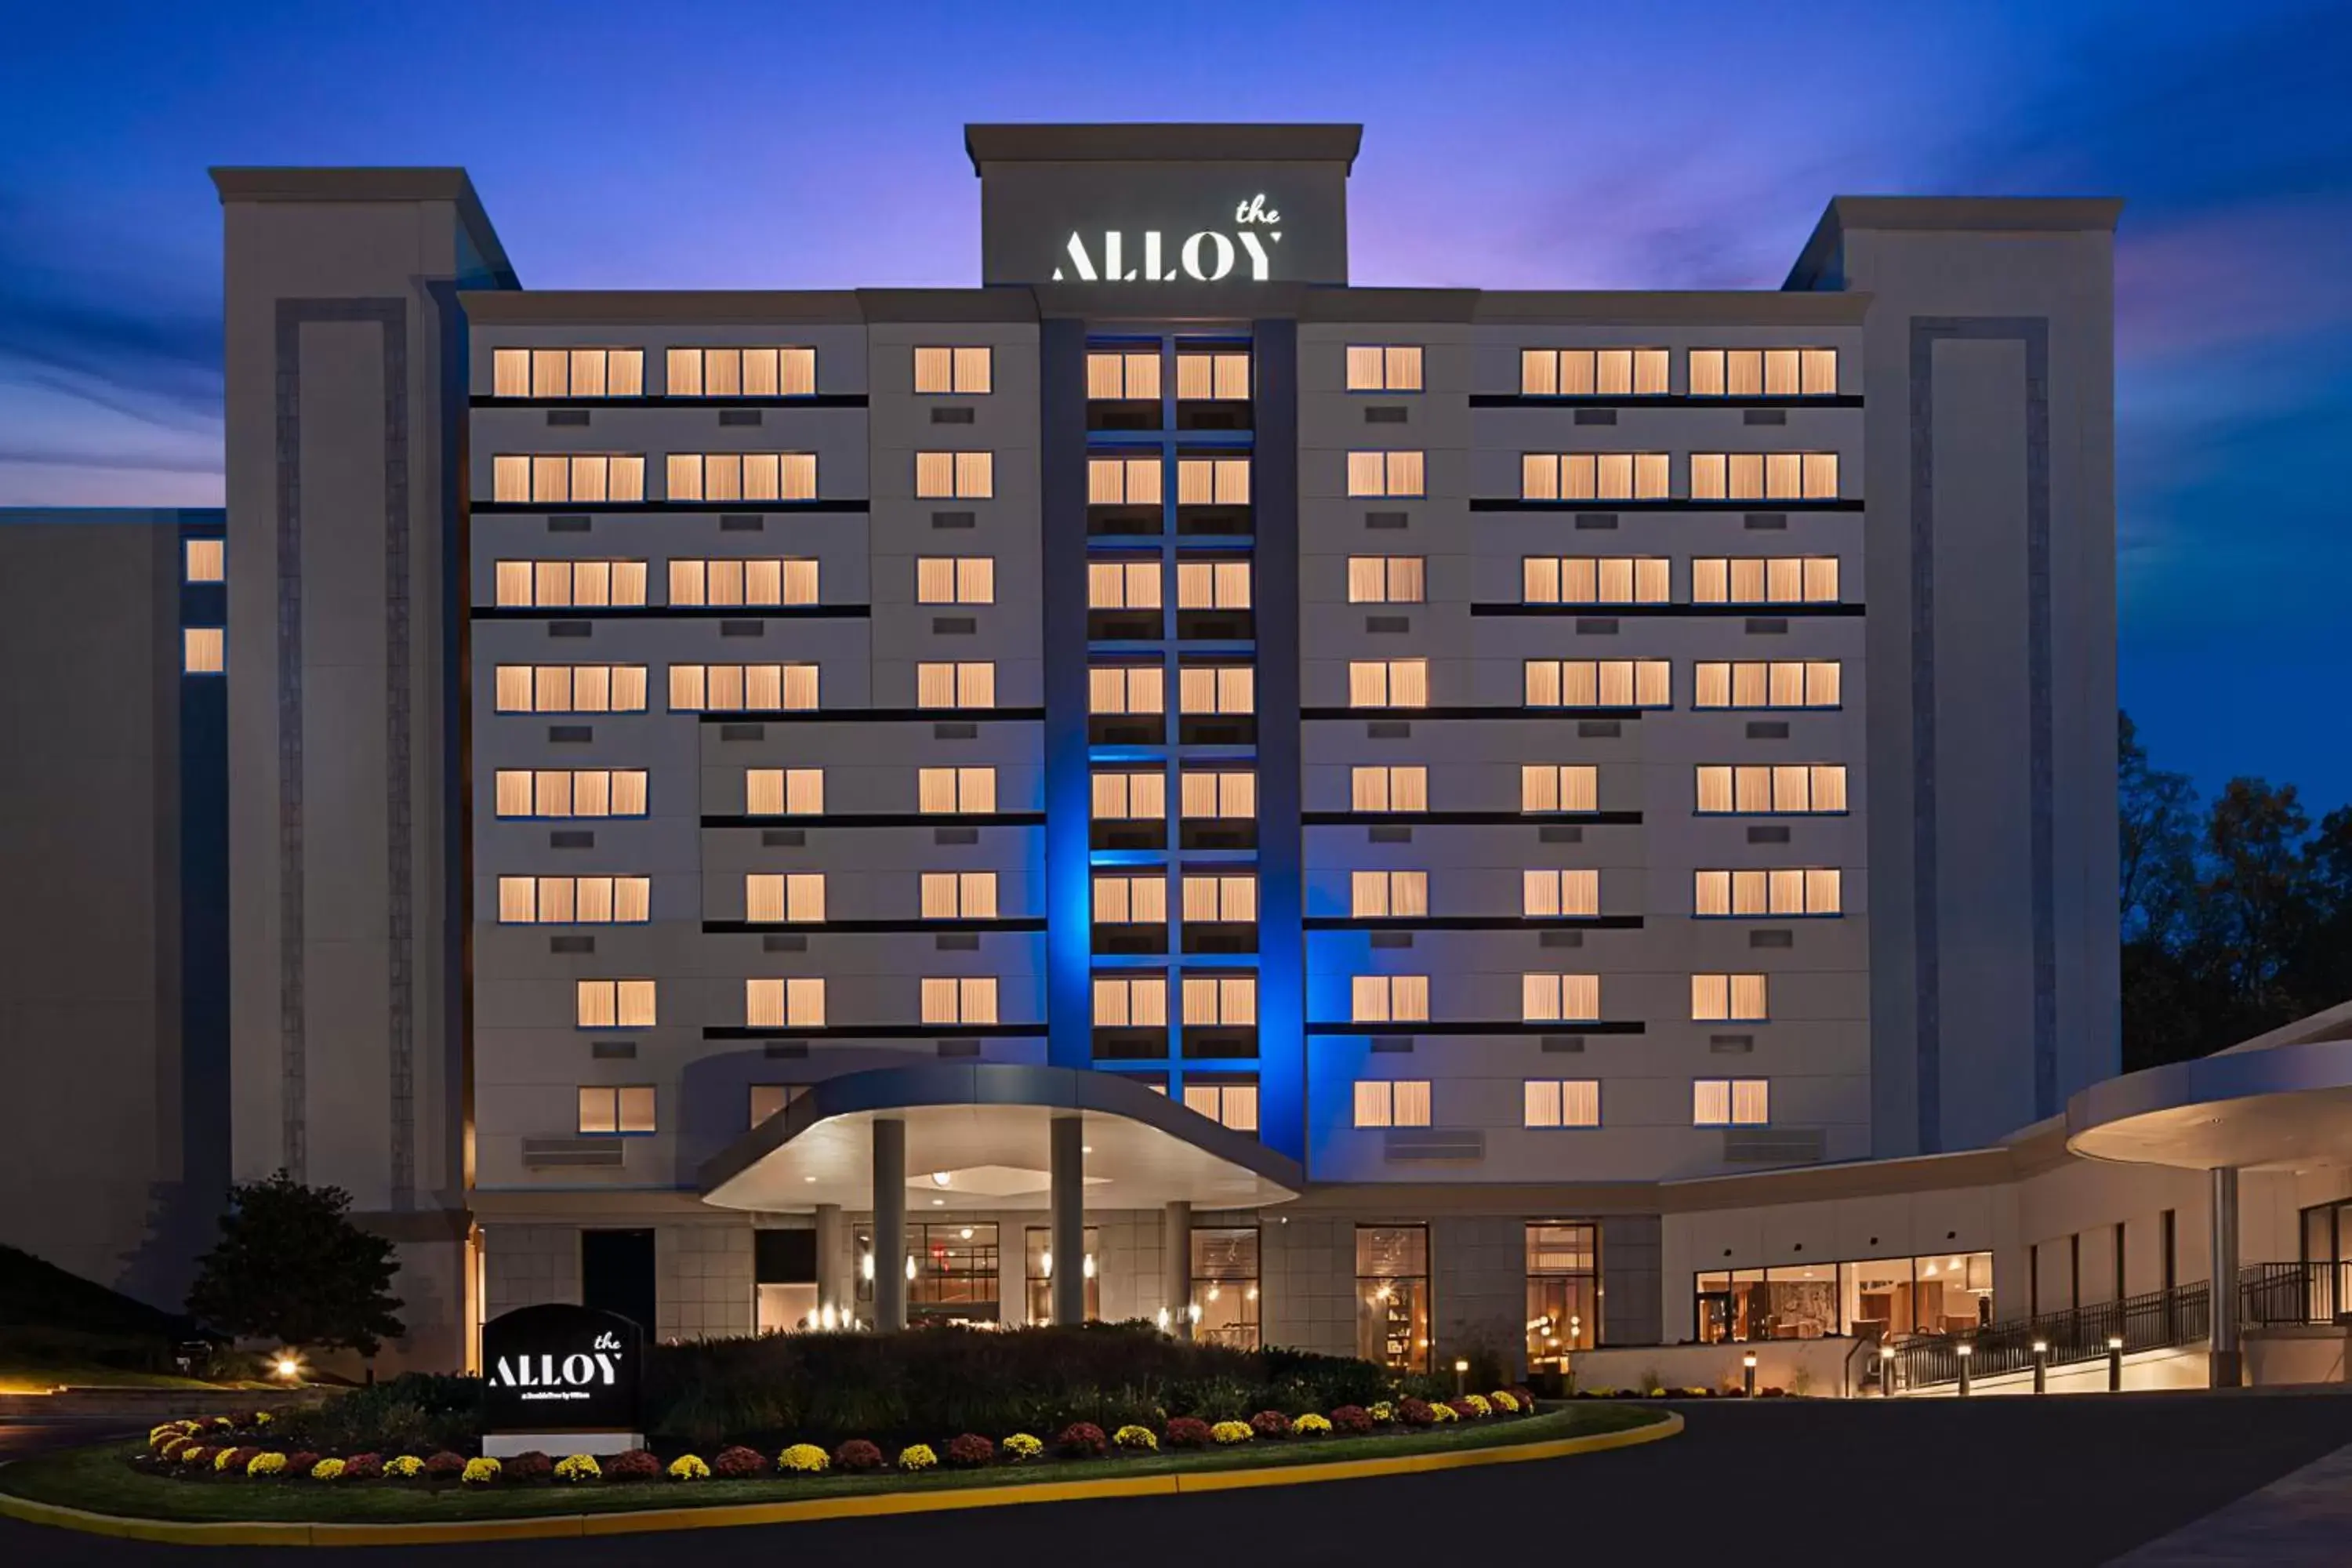 Property building in The Alloy, a DoubleTree by Hilton - Valley Forge